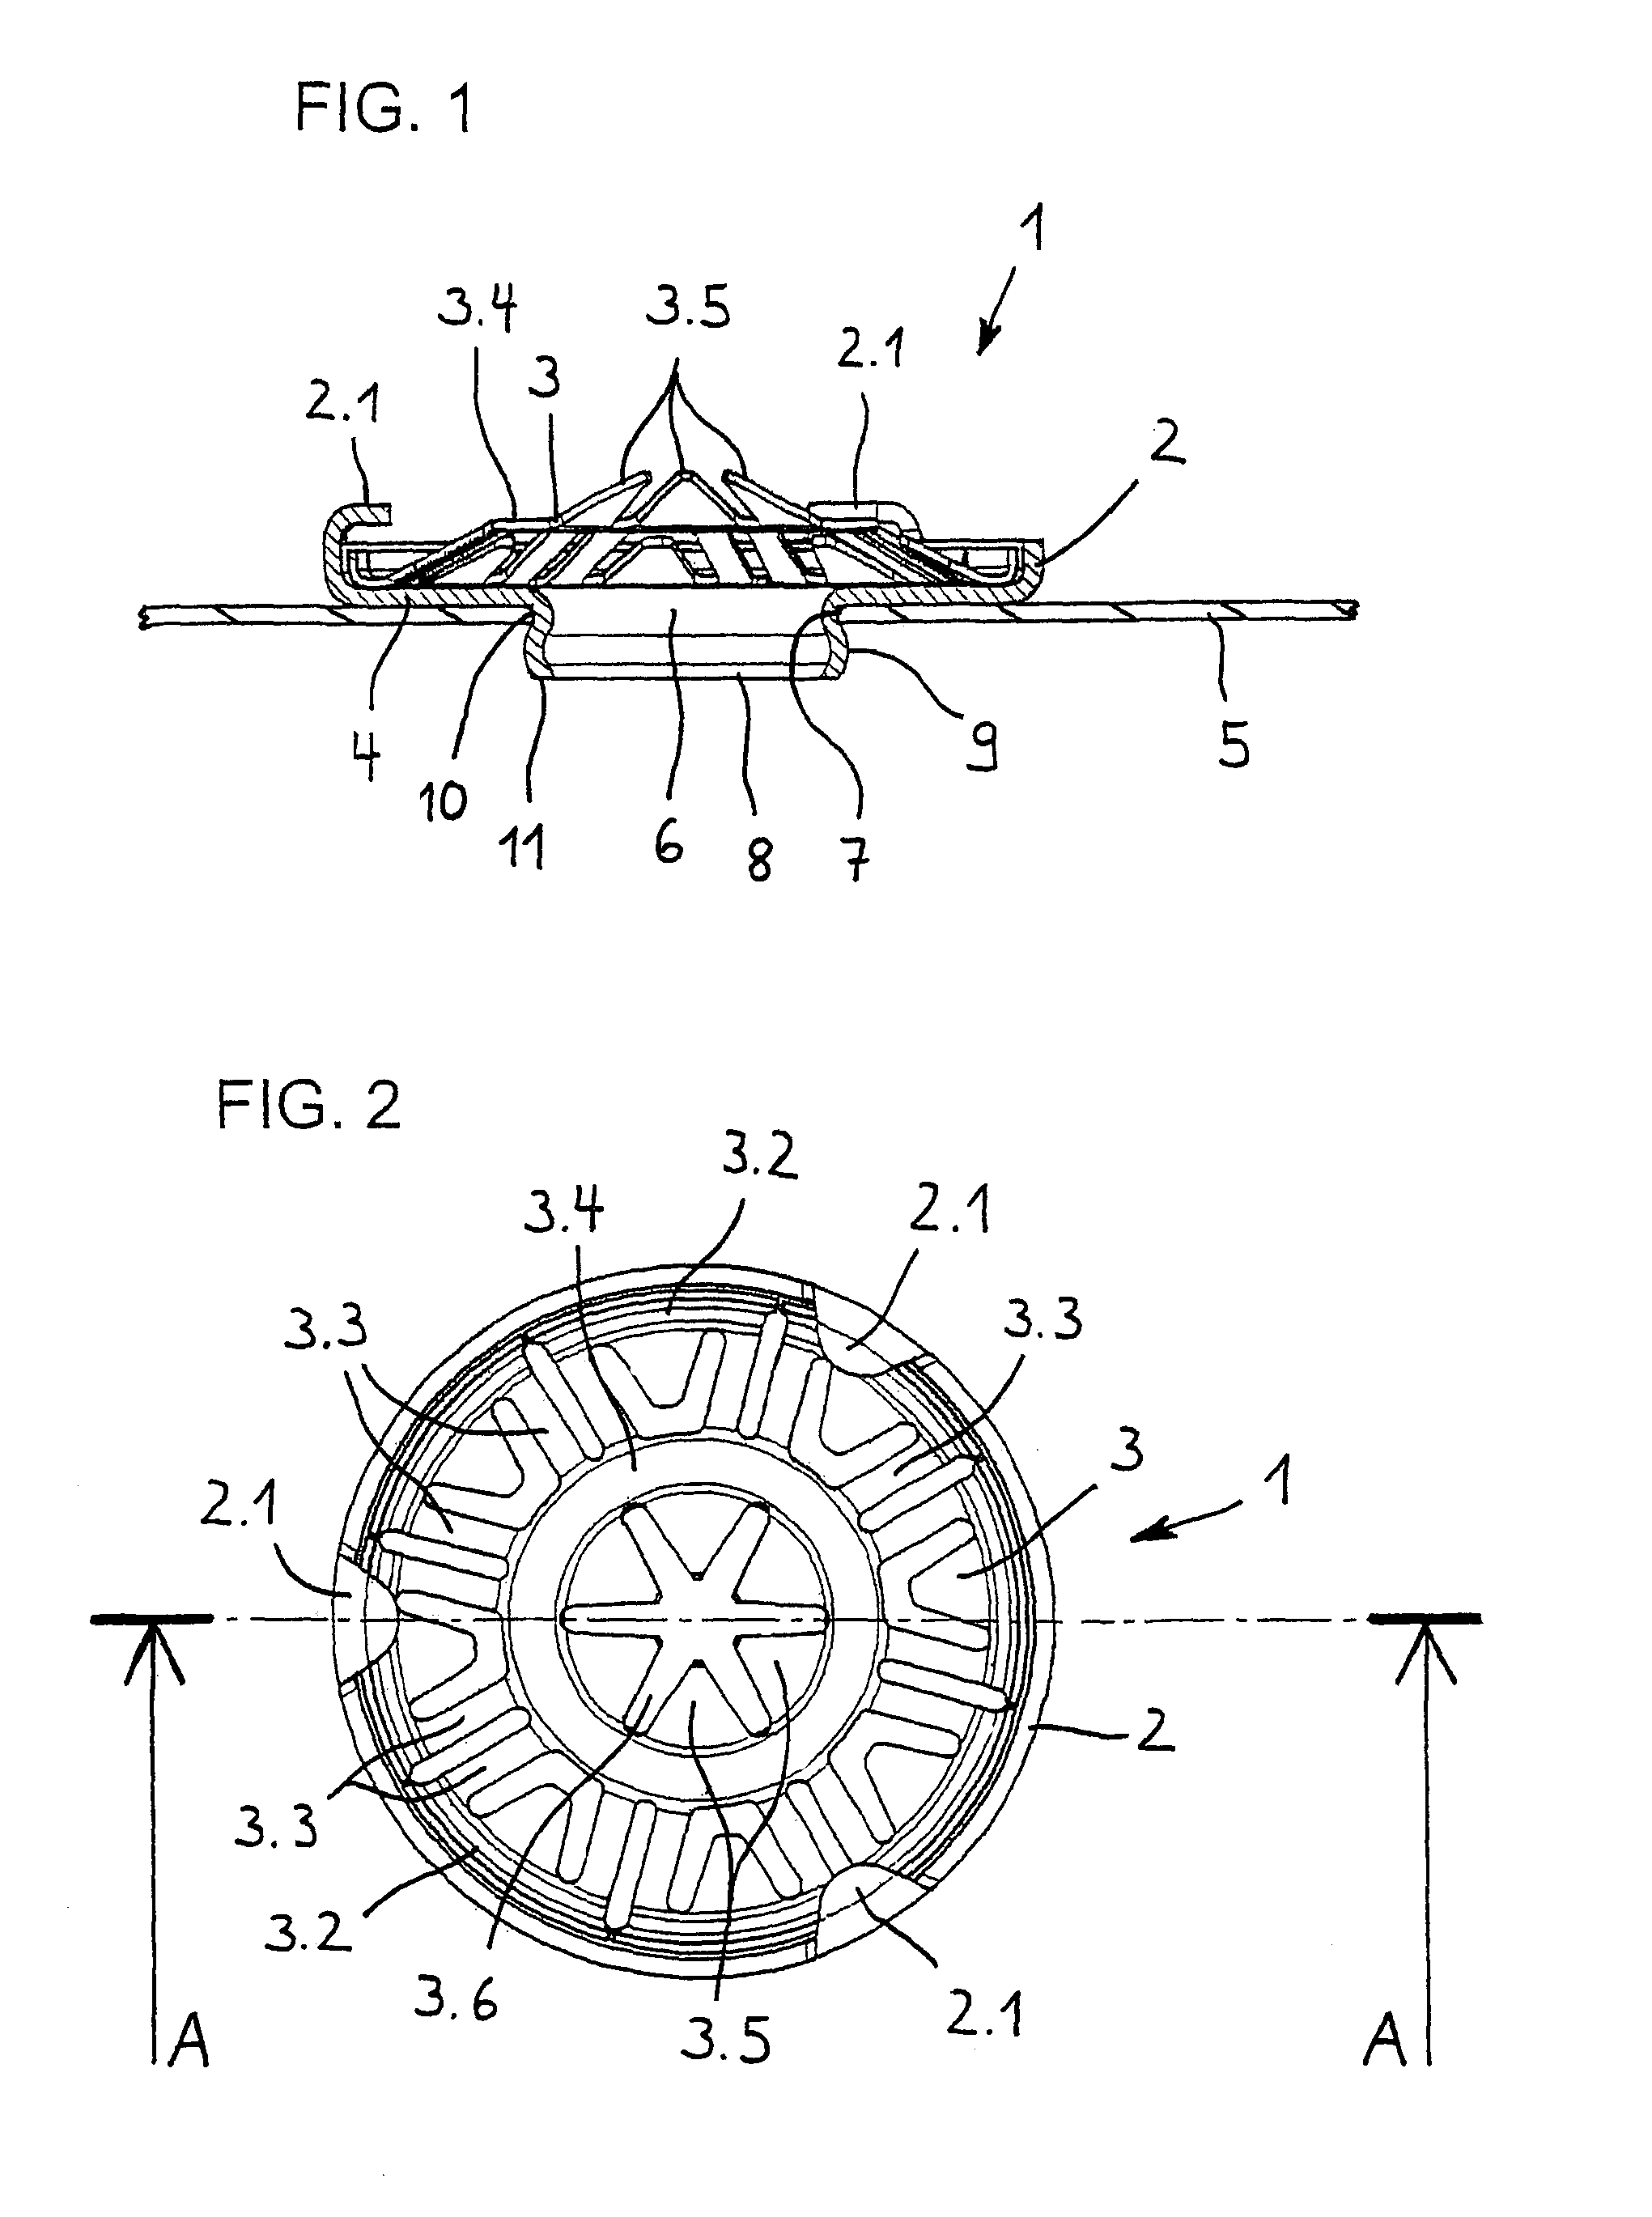 Fastening element for vehicle parts